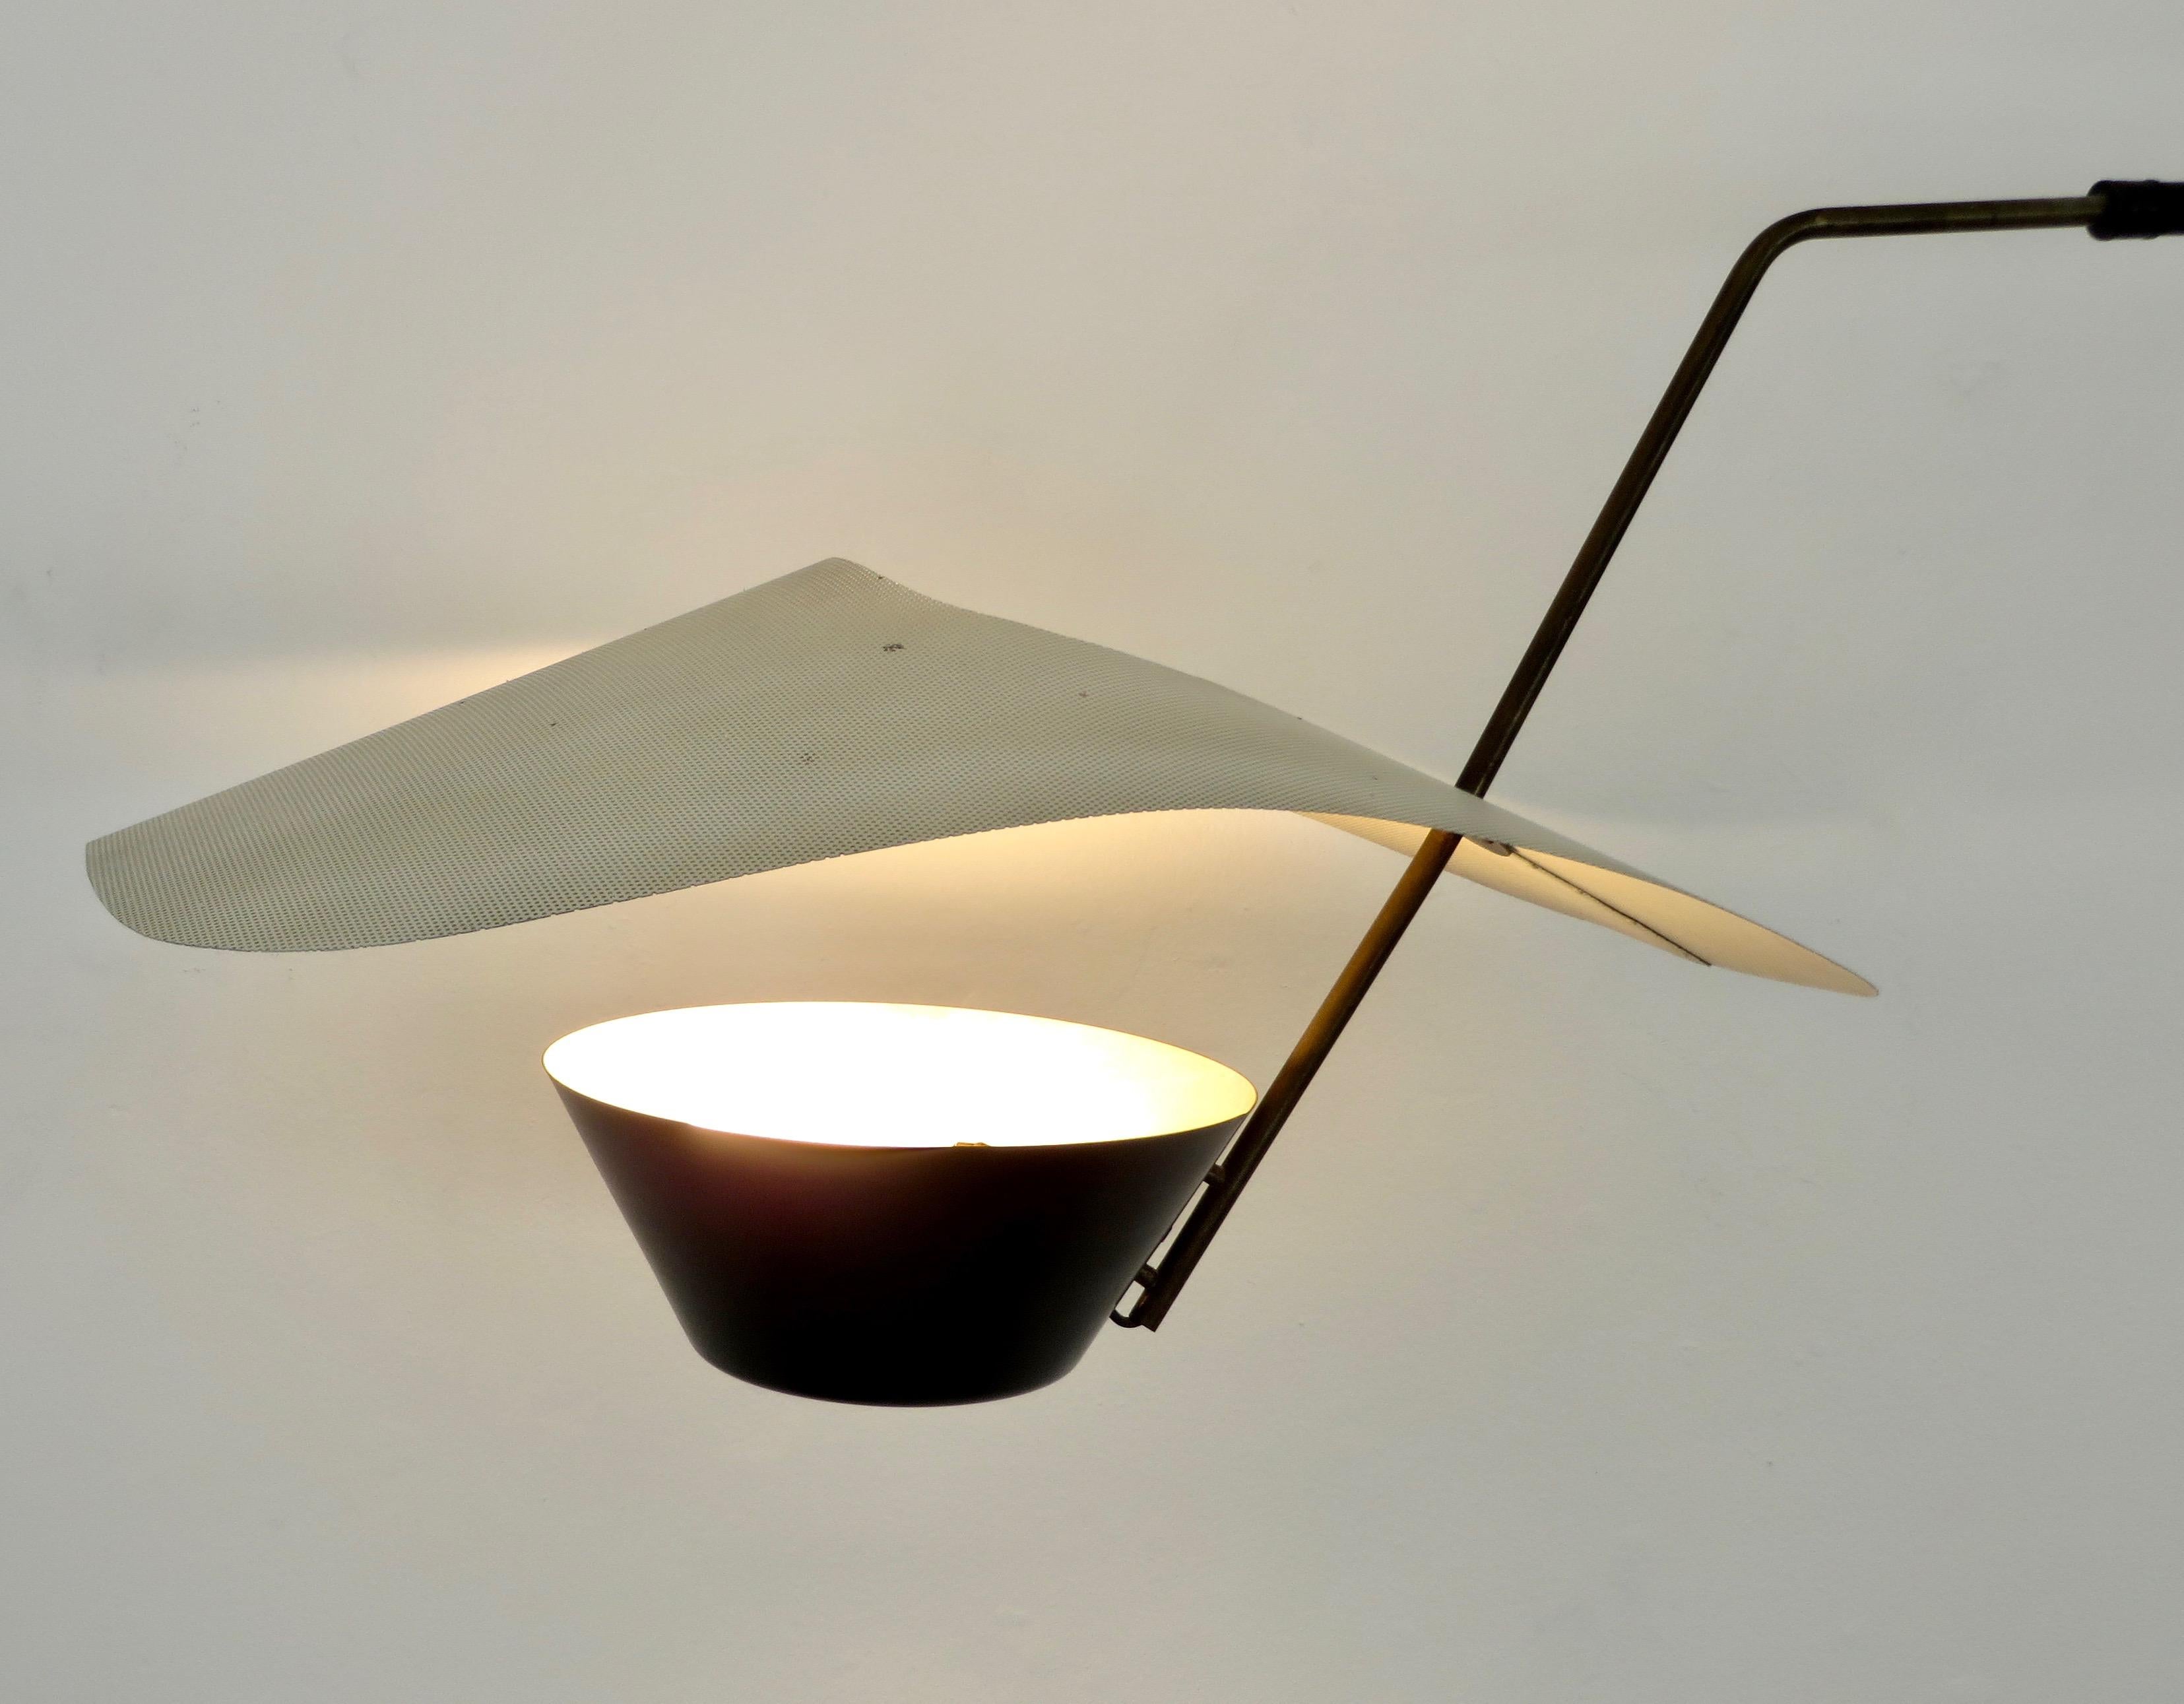 Kite Cerf Volant Applique Wall Light by Pierre Guariche Editioned by Disderot 8